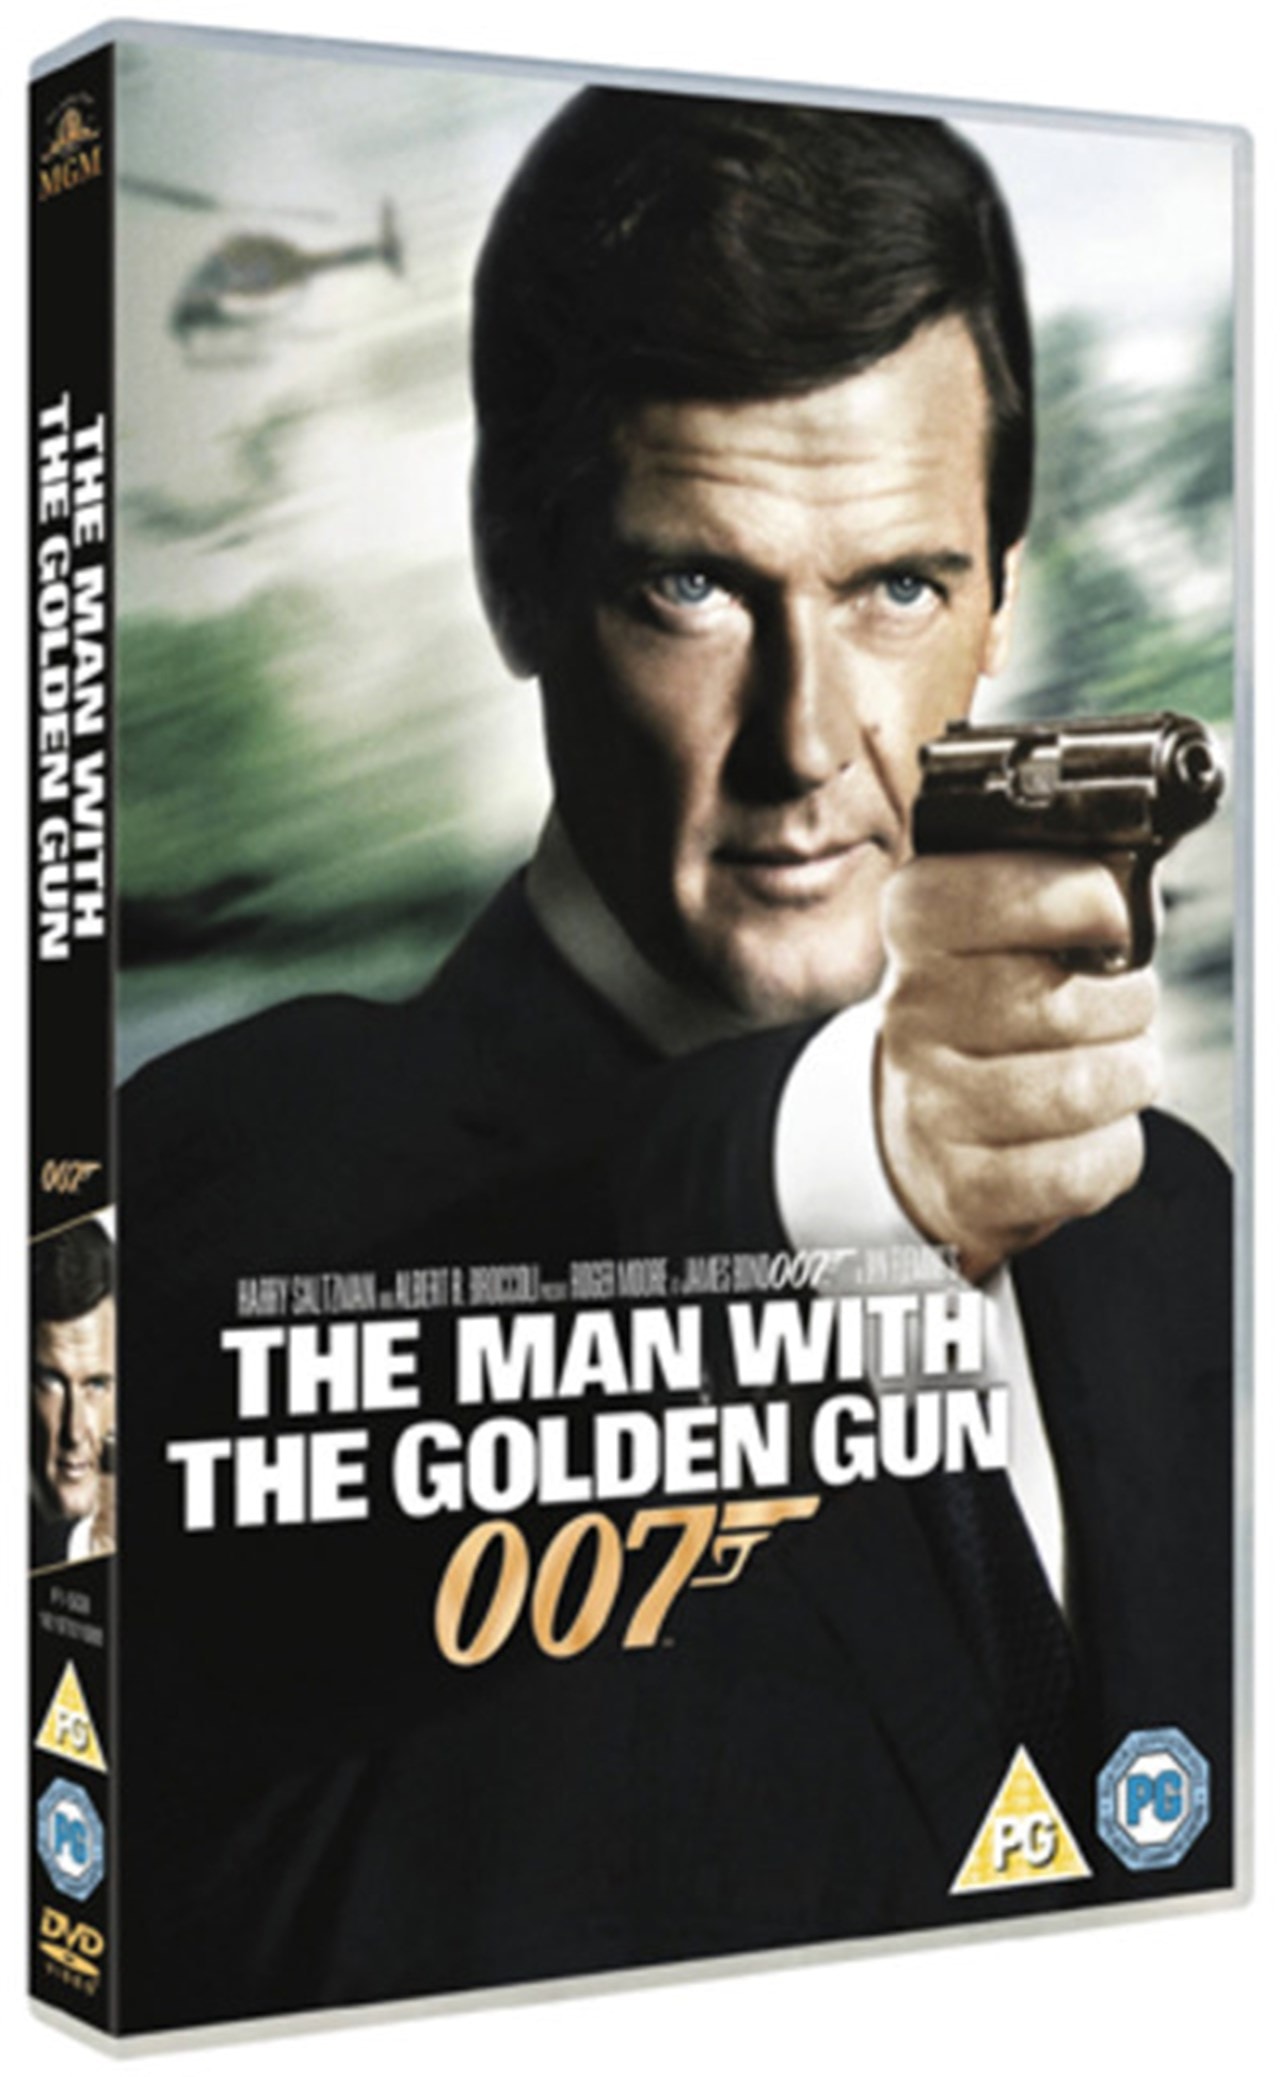 The Man With the Golden Gun | DVD | Free shipping over £20 | HMV Store